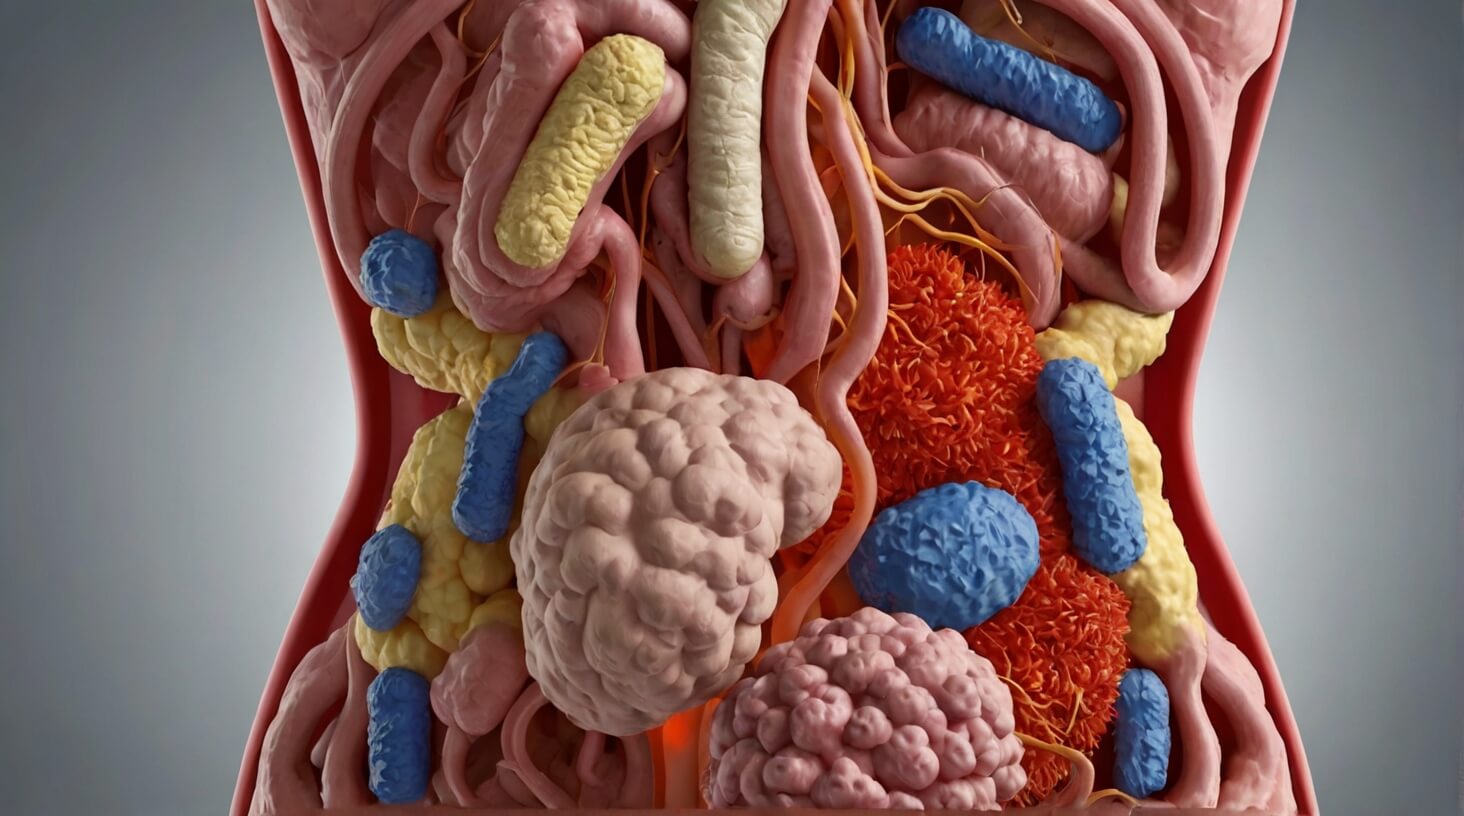 Abstract image depicting a scientific concept of inflammatory markers interacting with gut flora